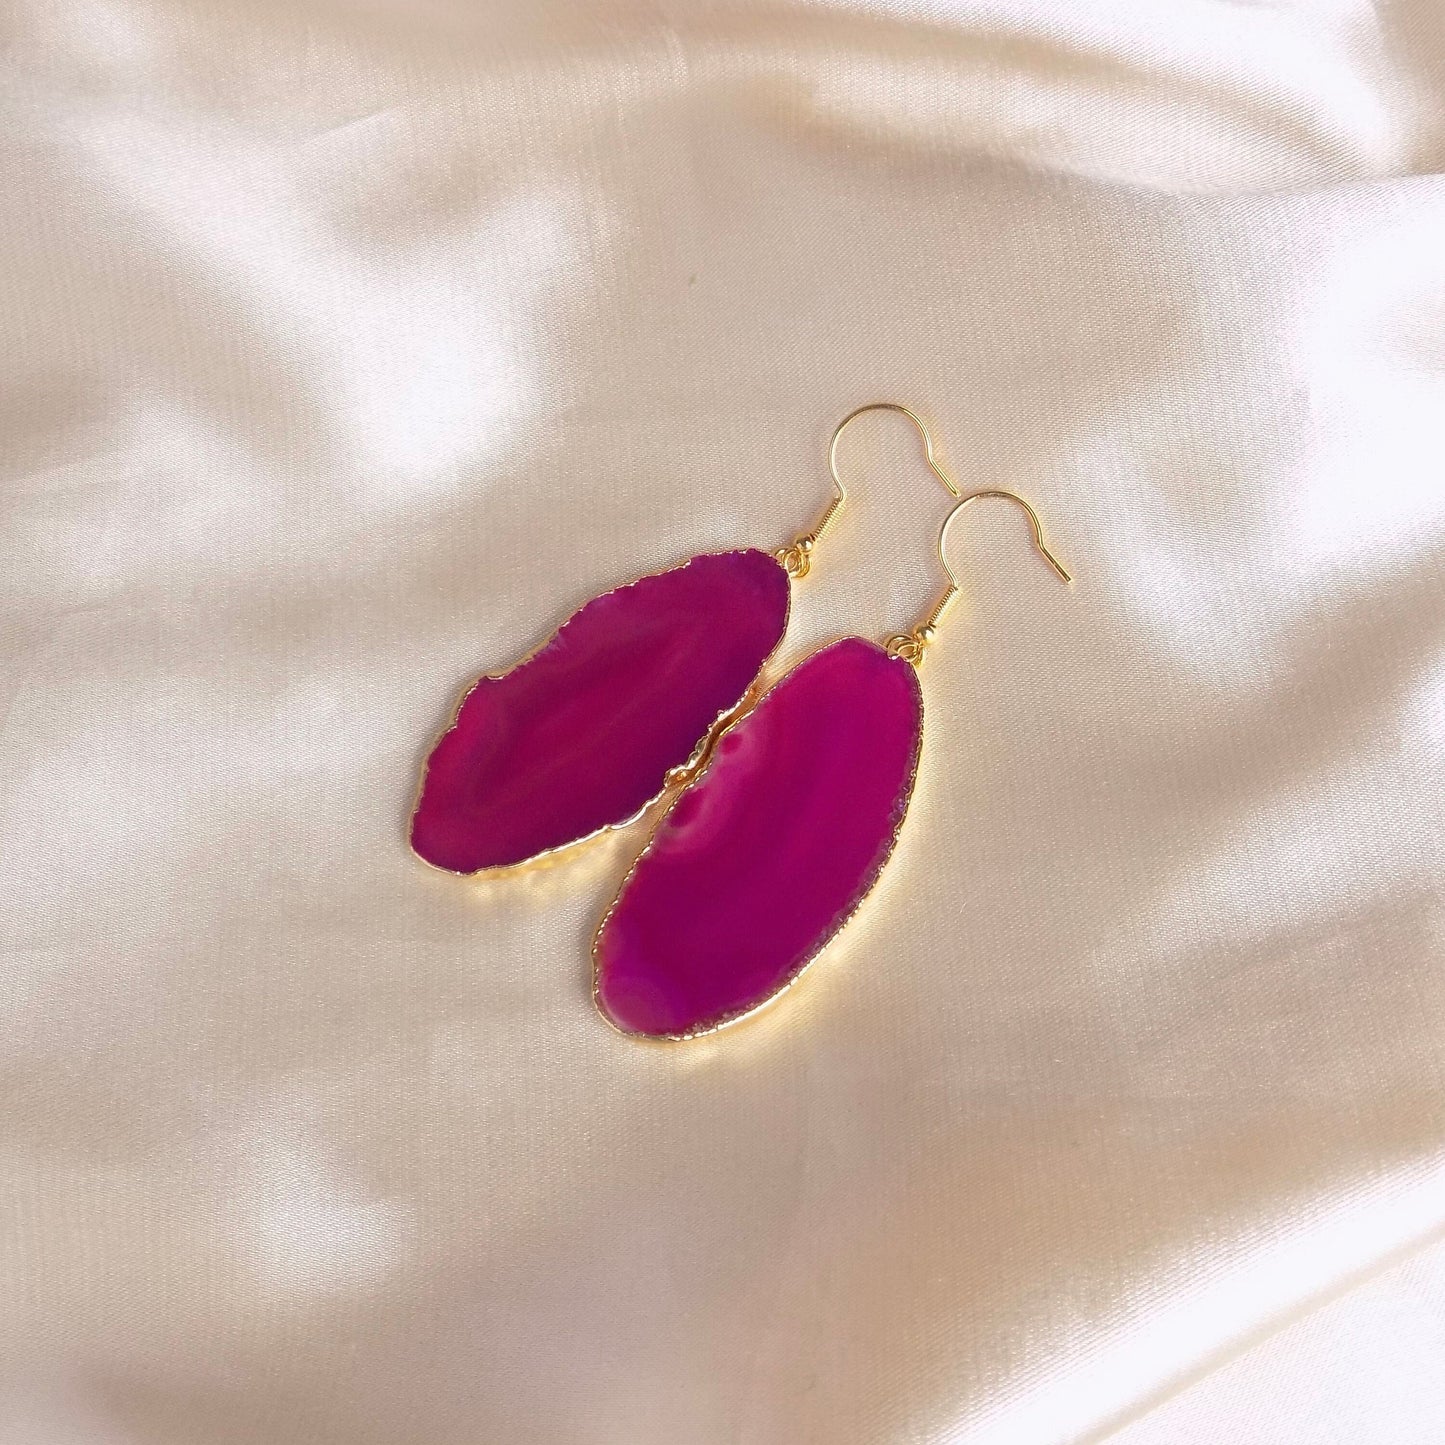 Hot Pink Agate Earrings, Large Statement Jewelry, Christmas Gifts Women, G15-145